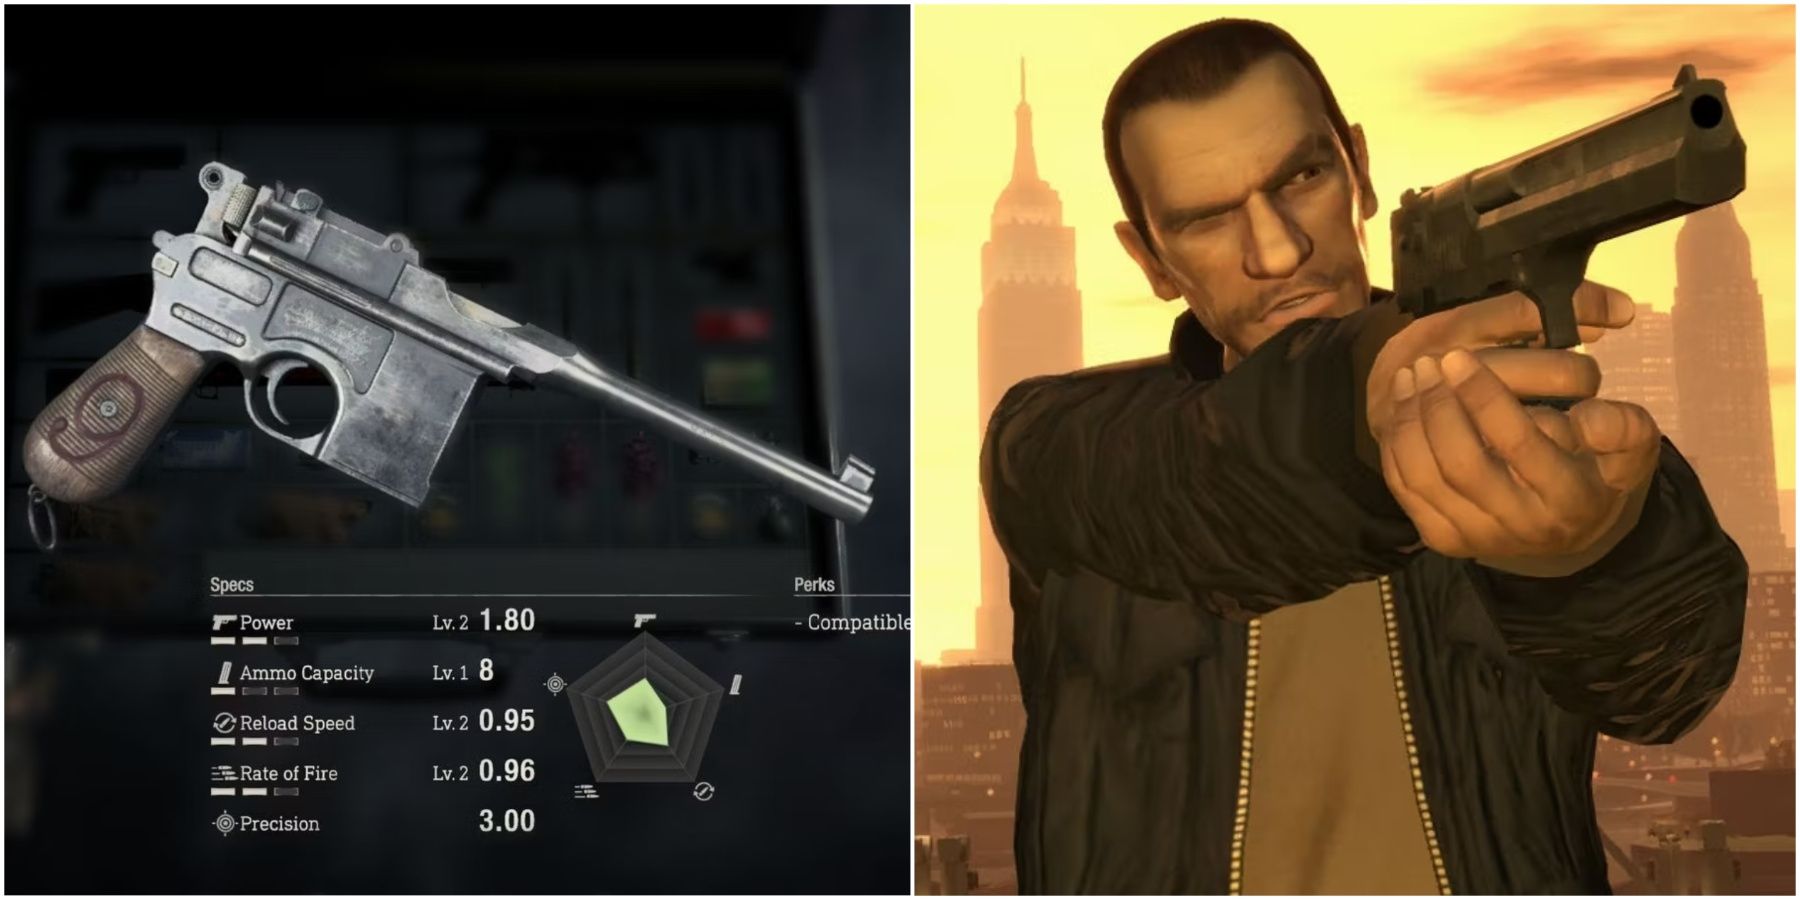 Red9 in Resident Evil 4 and Niko Bellic in Grand Theft Auto 4